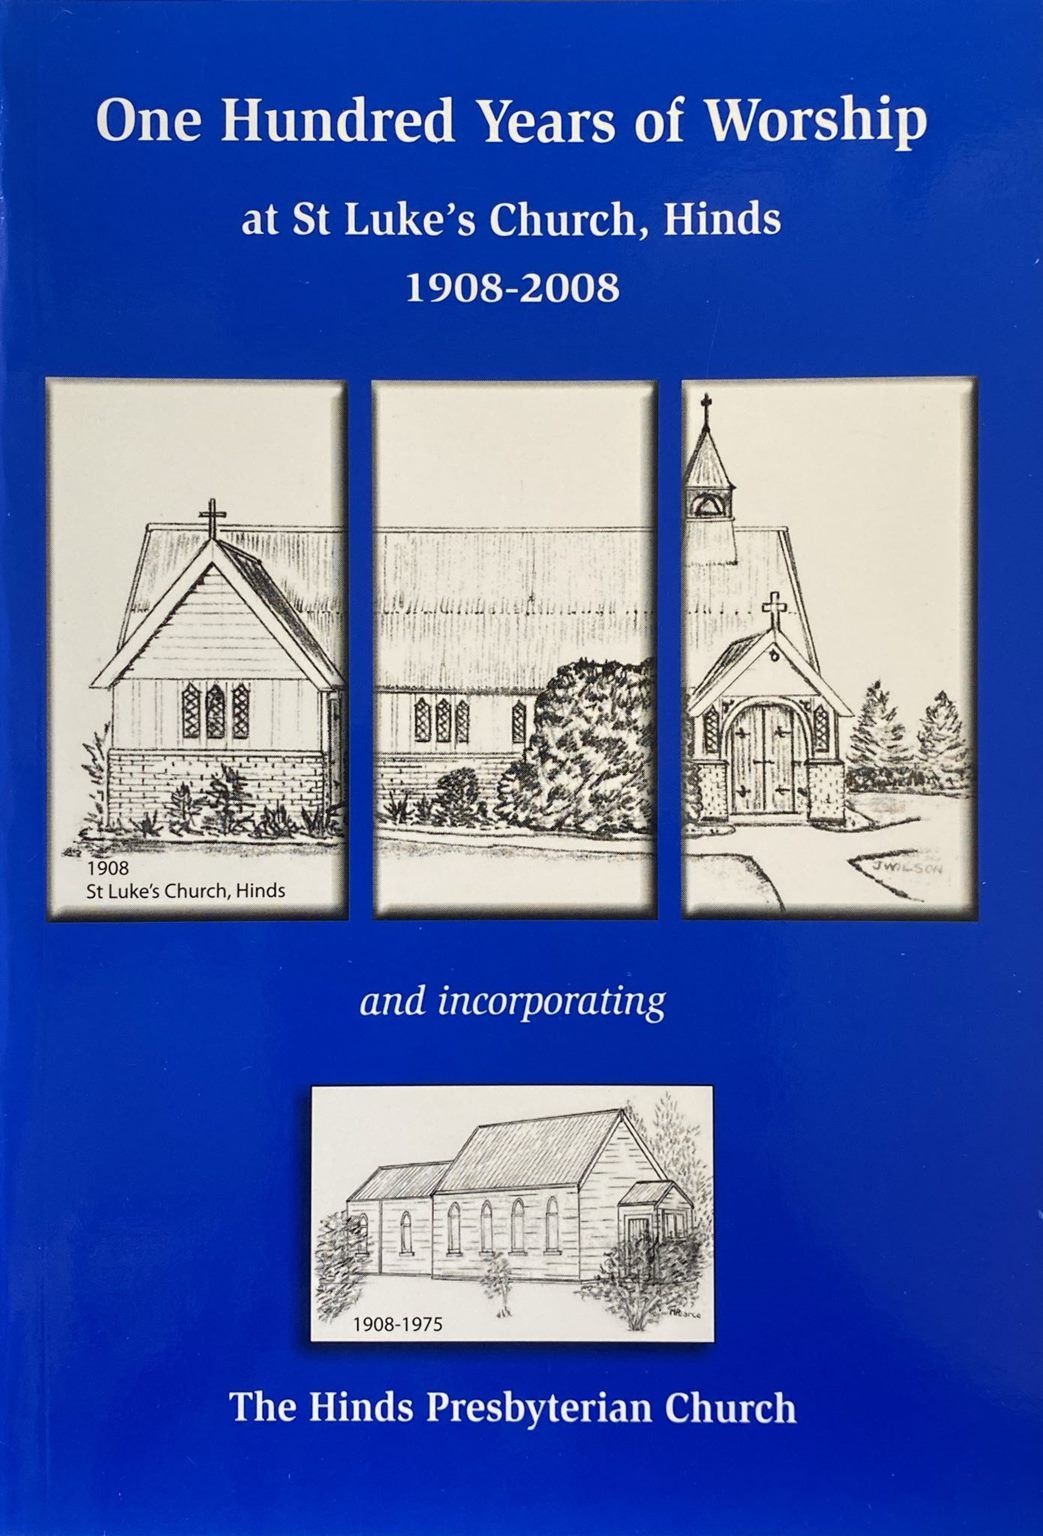 ONE HUNDRED YEARS OF WORSHIP: St Luke's Church, Hinds